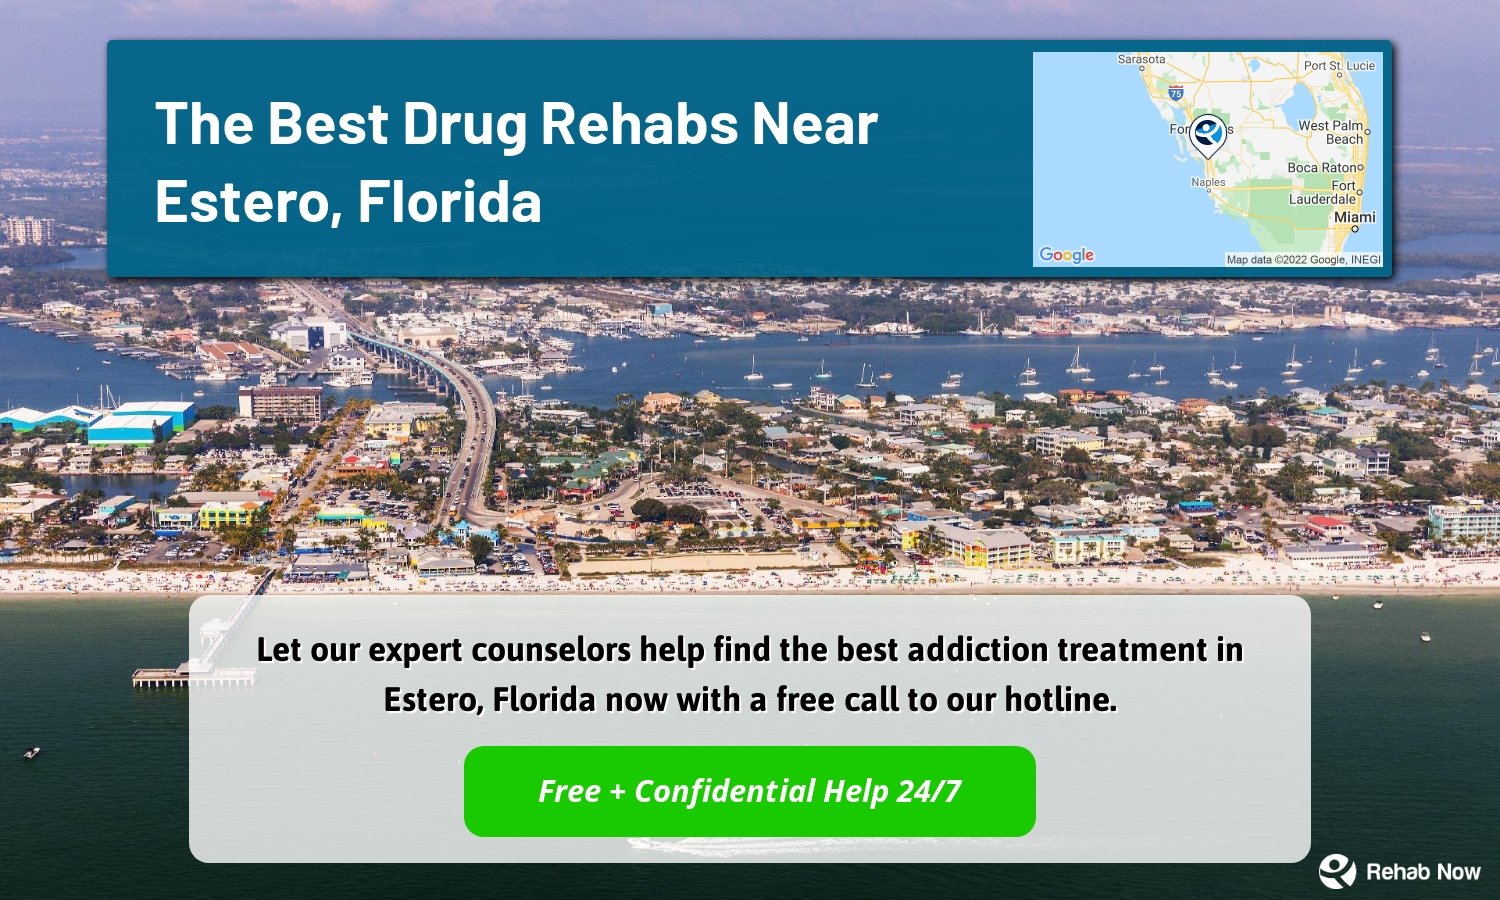 Let our expert counselors help find the best addiction treatment in Estero, Florida now with a free call to our hotline.